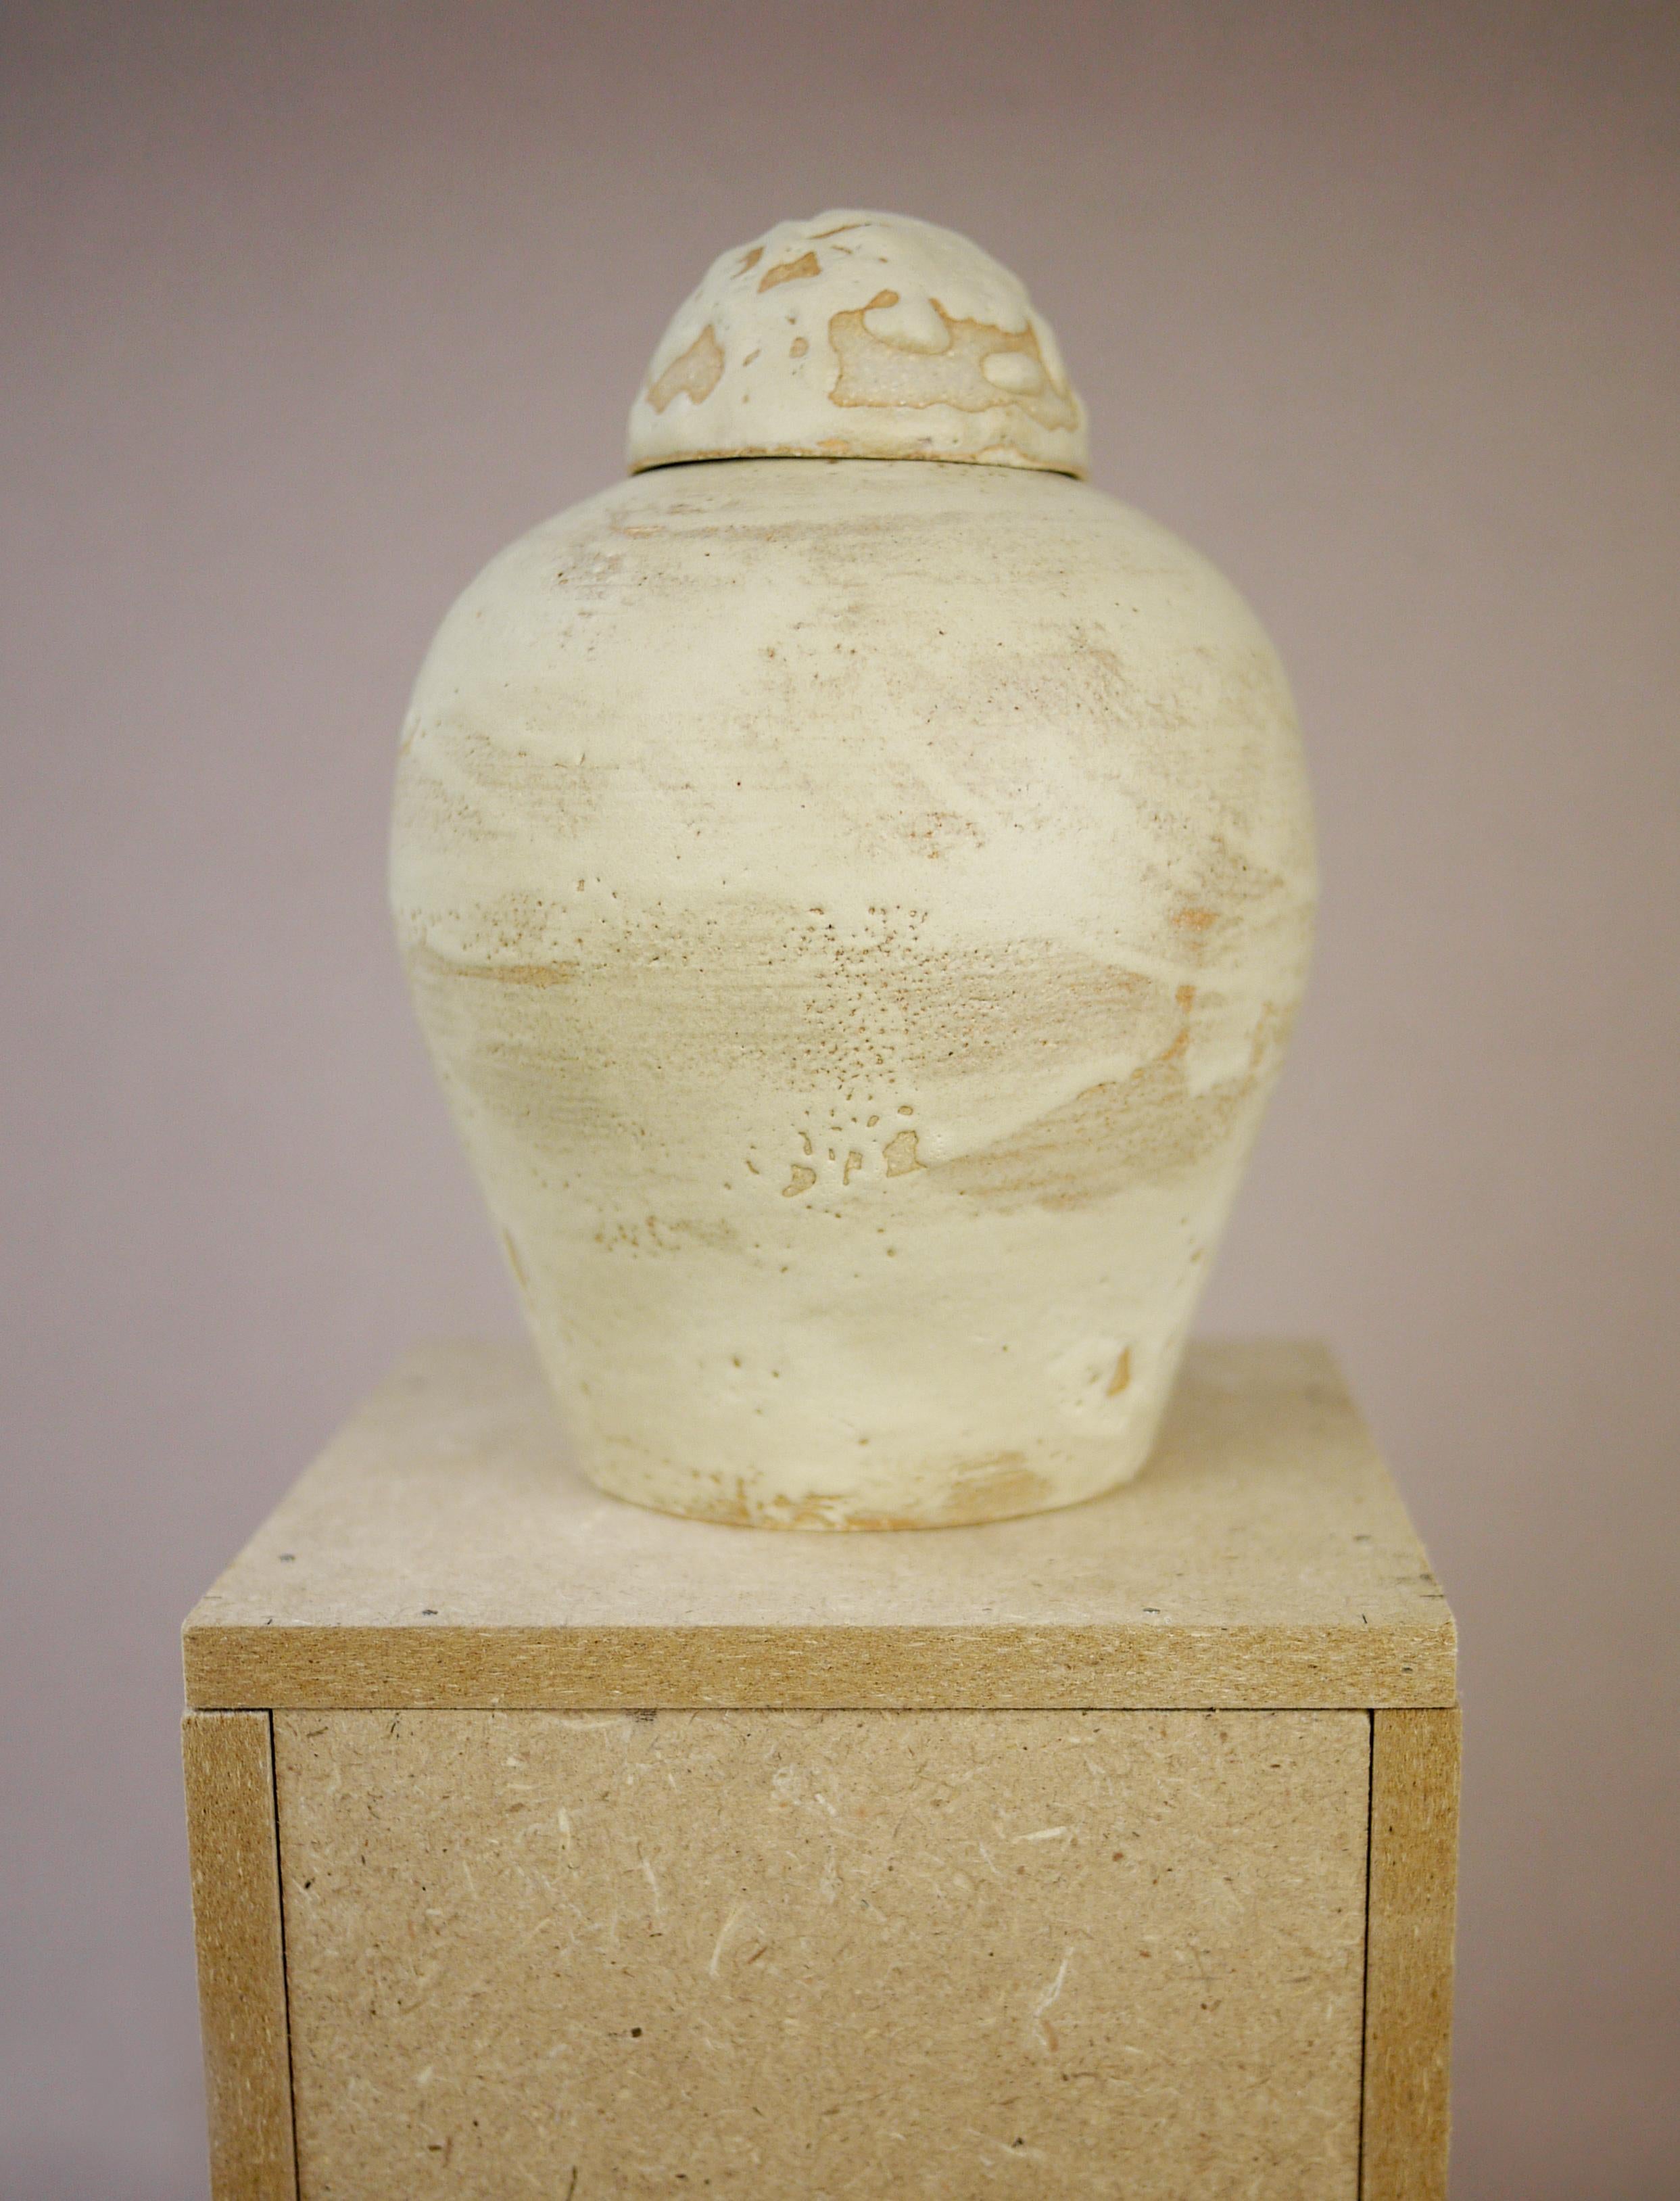 Inspired by the centenary of Tutankhamun tomb discovery, this lidded vase is a nod to Ancient Egypt canopic jars.
White stoneware and matt sand colored matt glaze.
2022

///
Juliette Teste 
French, 1986, lives and works in Paris, France.
Teste’s